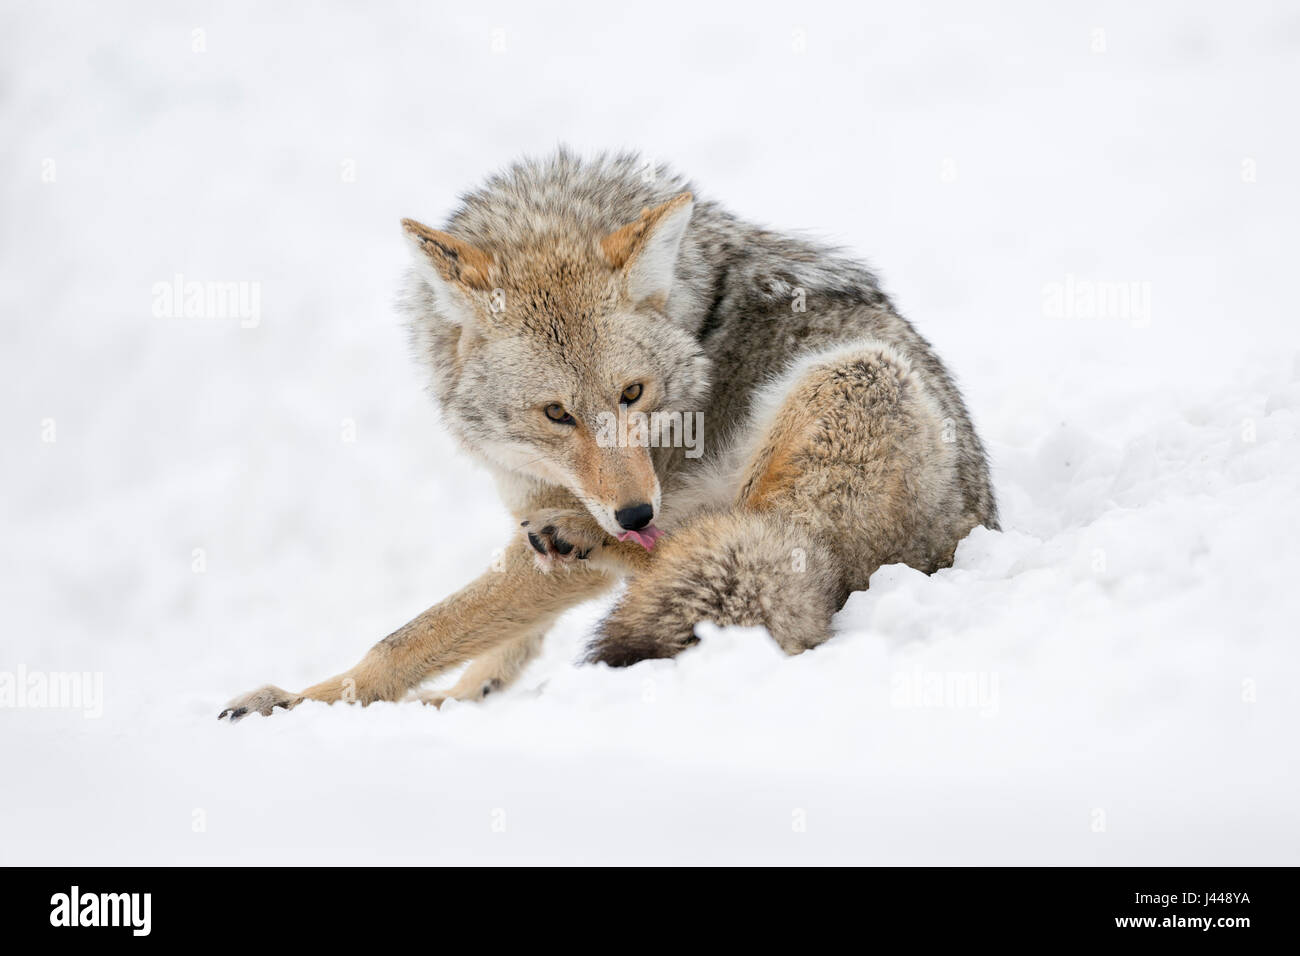 Coyote ( Canis latrans ) in winter, sitting in snow, licking its fur and its paws with the tongue, watching, looks funny, Yellowstone NP, Wyoming, USA Stock Photo